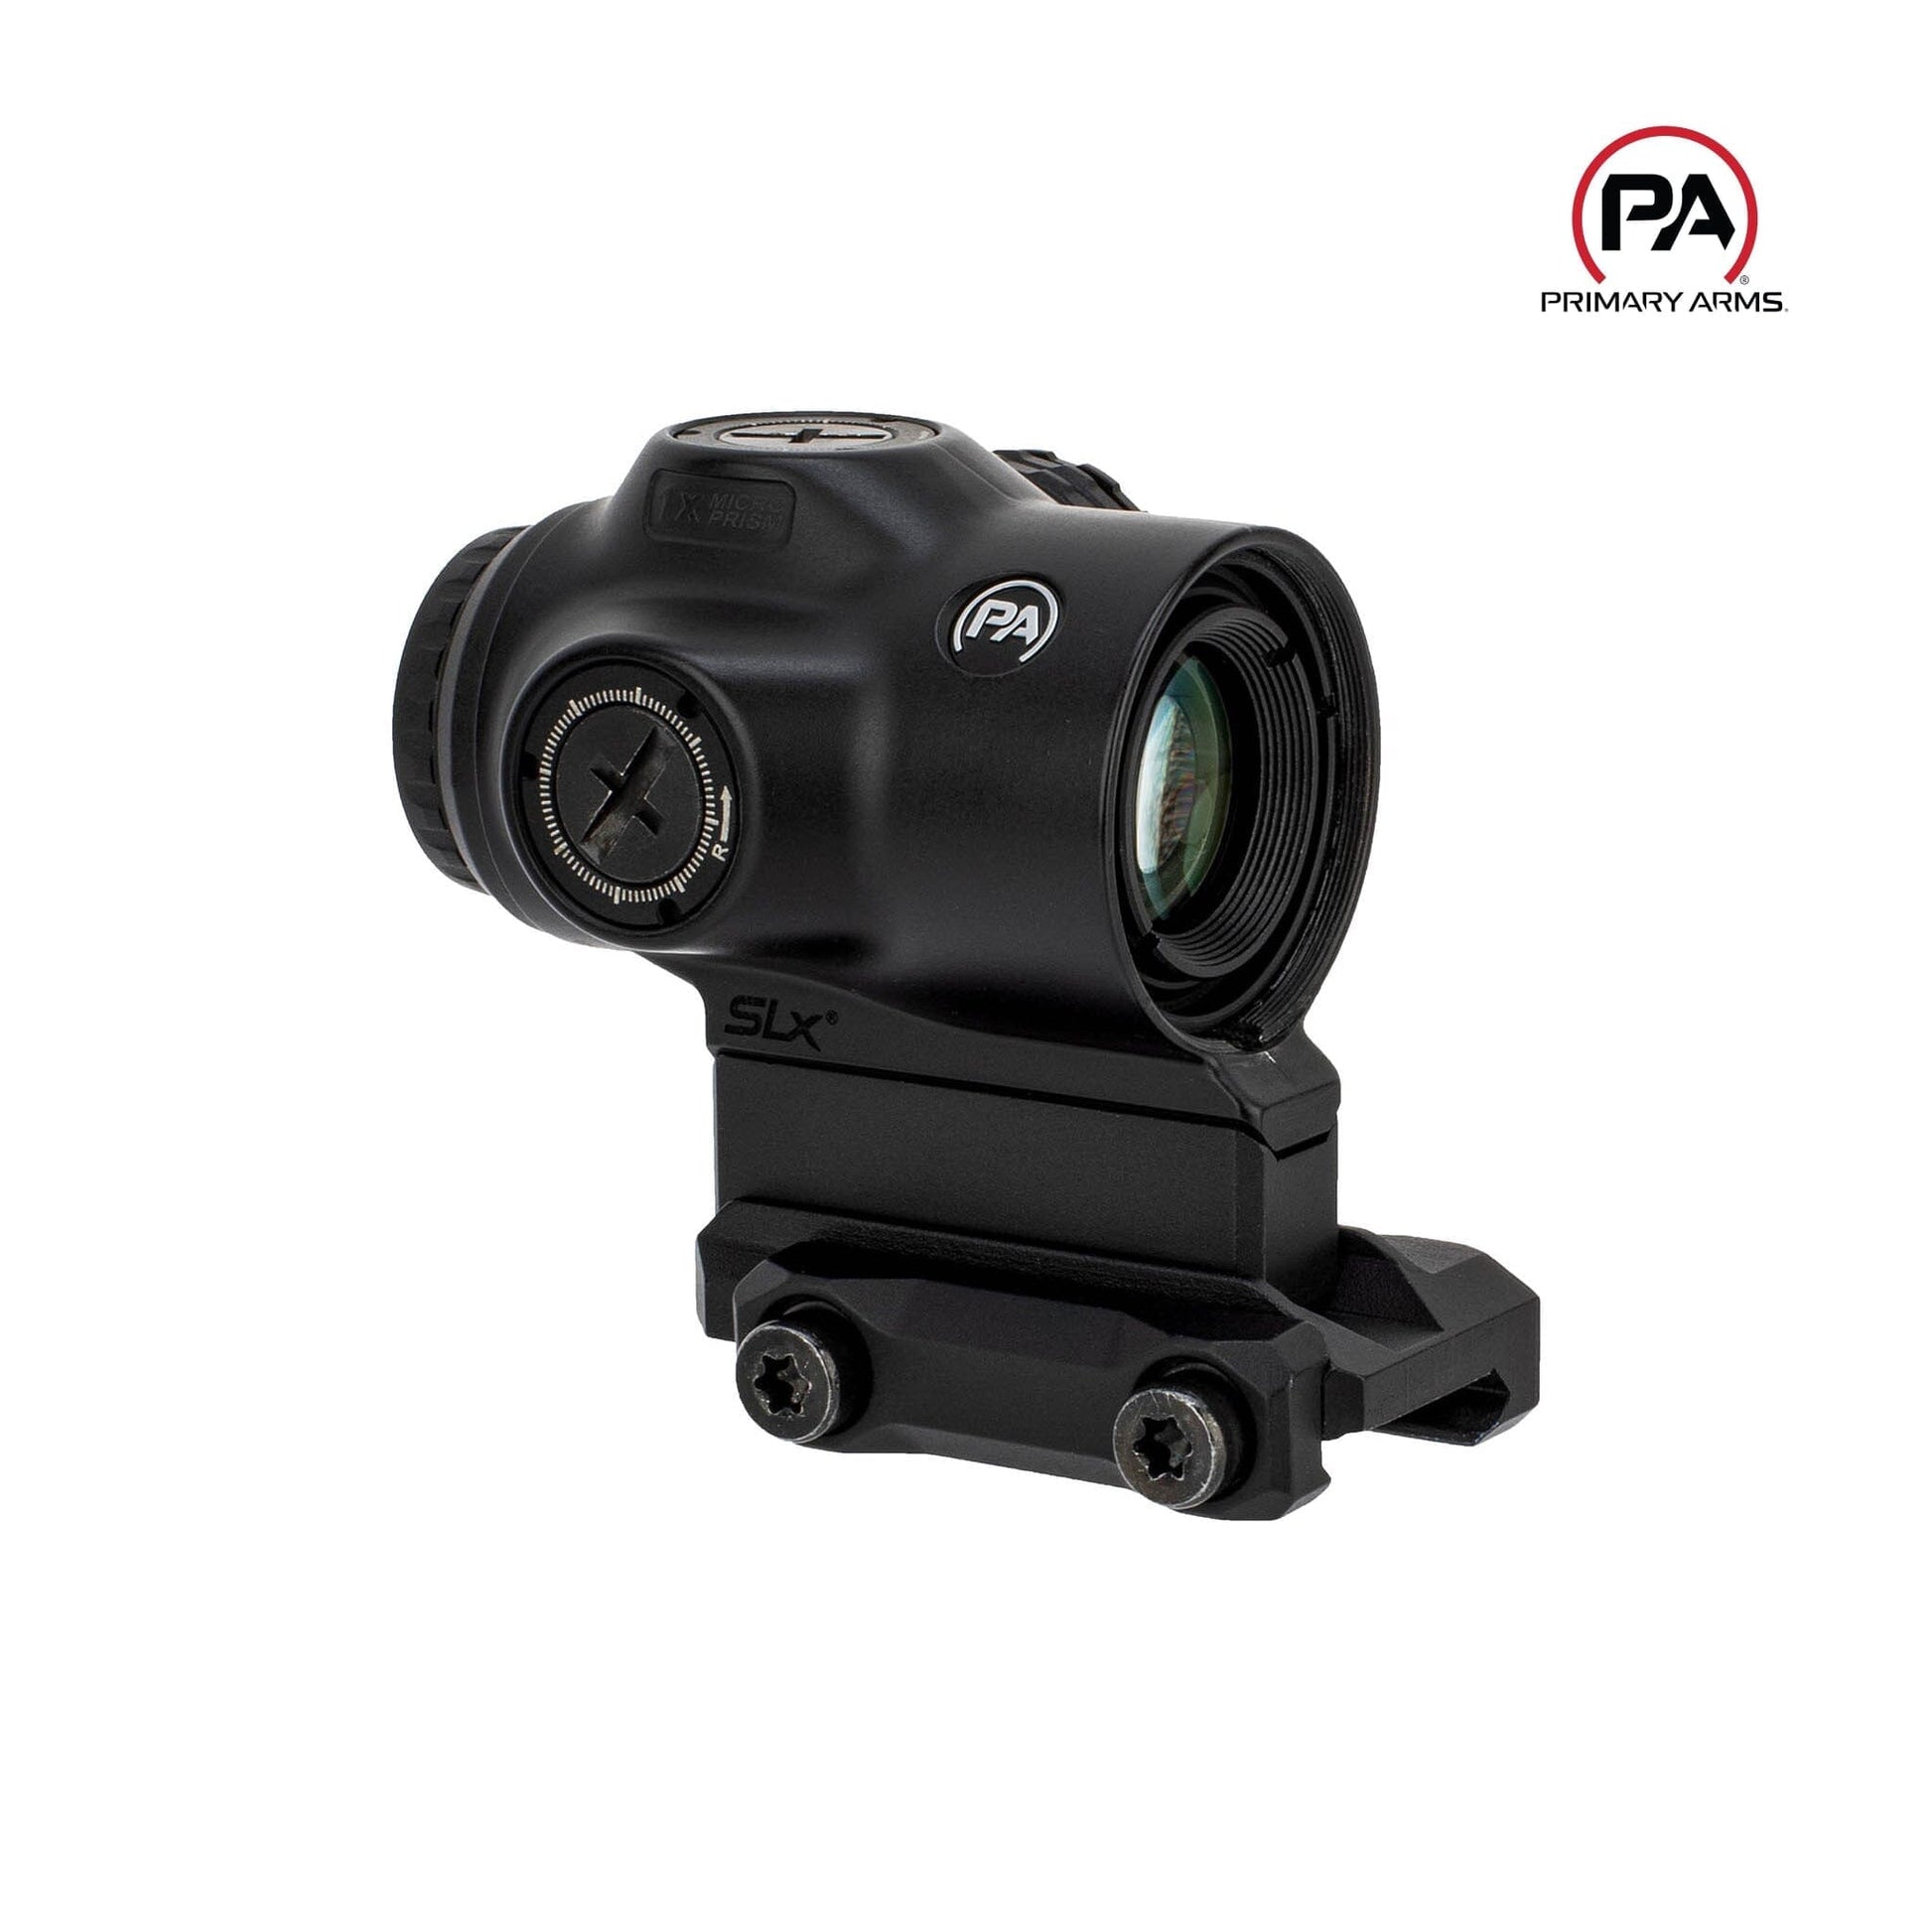 Primary Arms SLx 1X MicroPrism Scope - Green ACSS Cyclops Reticle - Gen II Prism Rifle Scope Primary Arms 